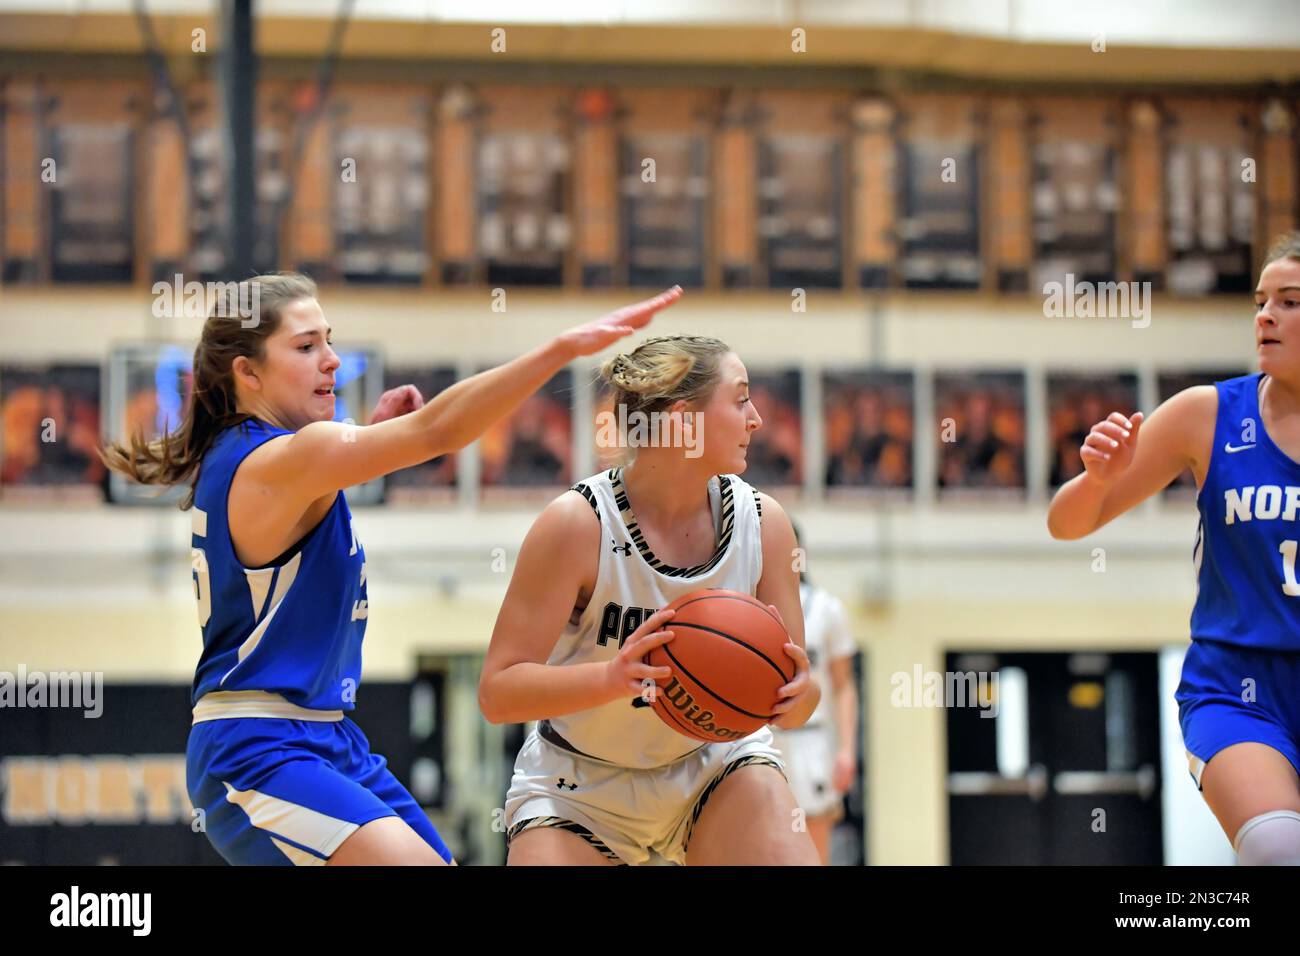 USA. Near the baseline and under the hoop, a player looks for an outlet pass opportunity. Stock Photo